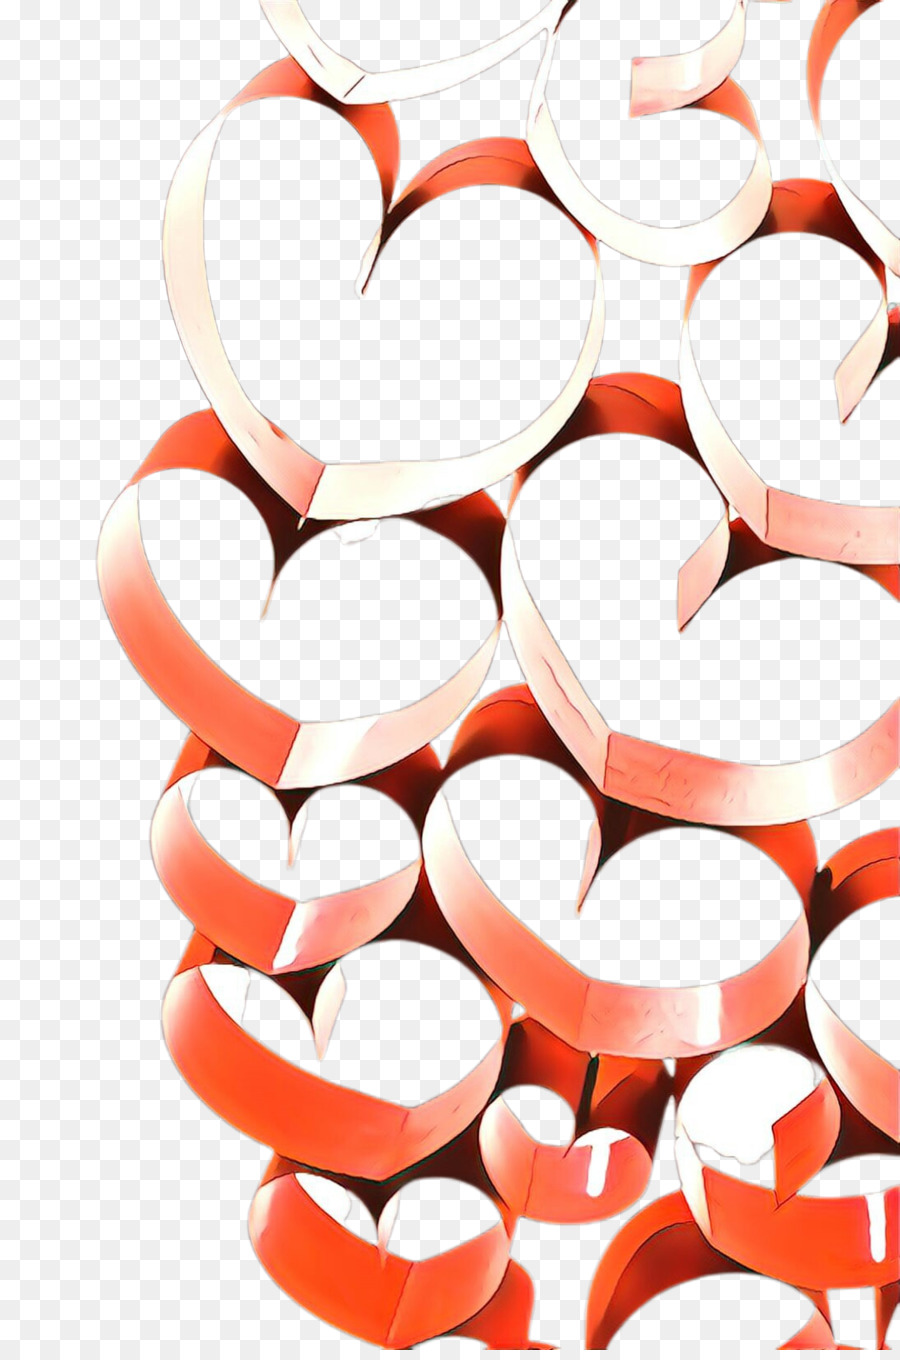 Coeur，L'amour PNG